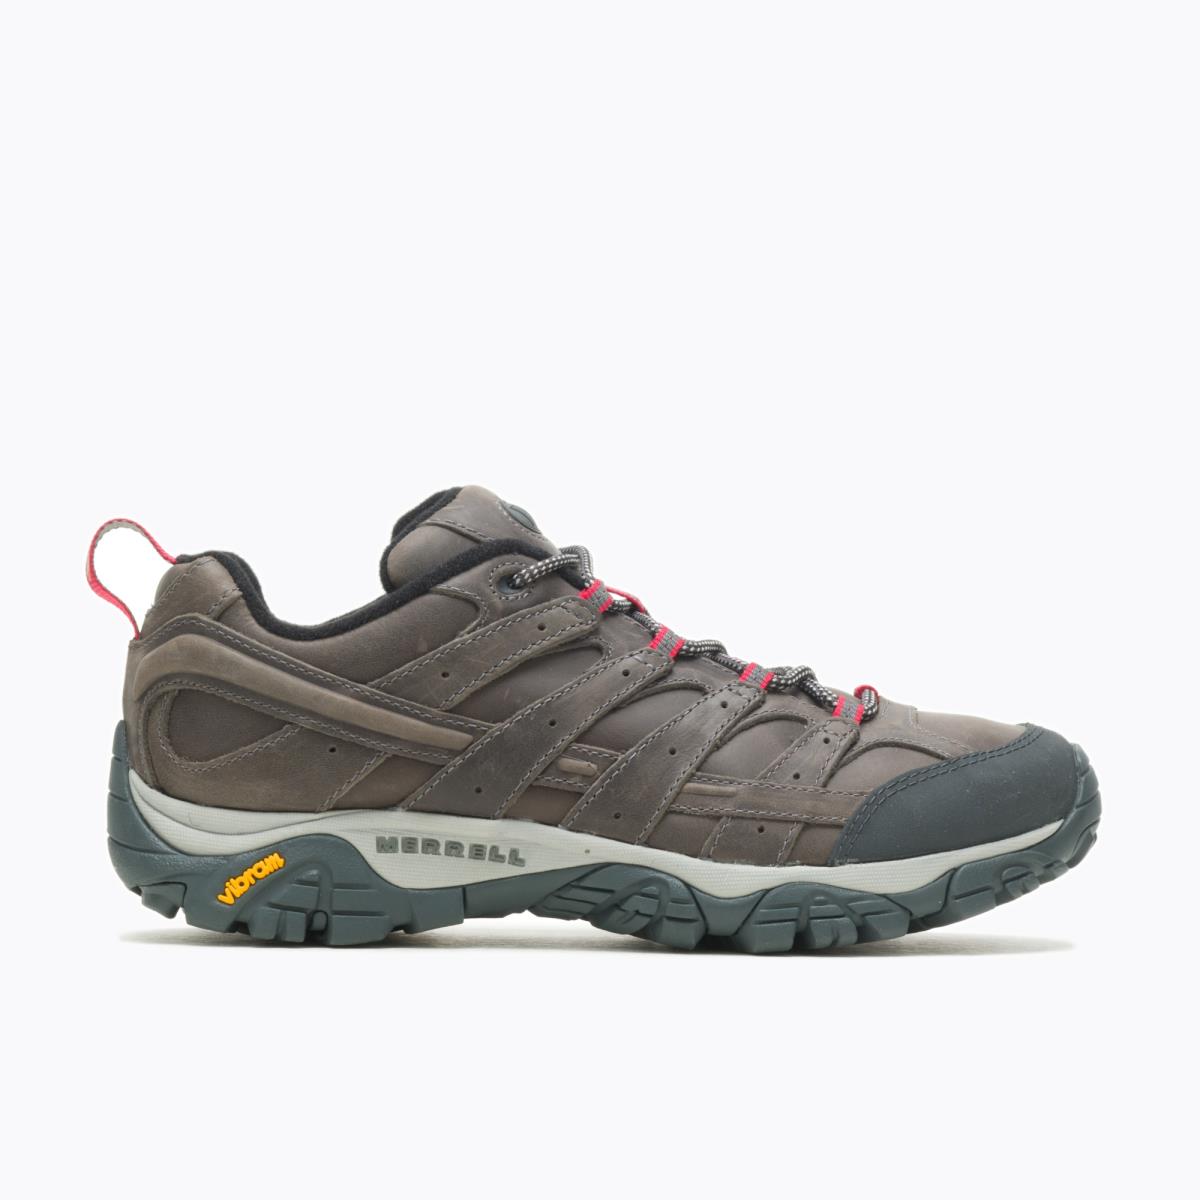 Merrell Men Moab 2 Prime Hiking Shoes Suede Leather-and-mesh Charcoal